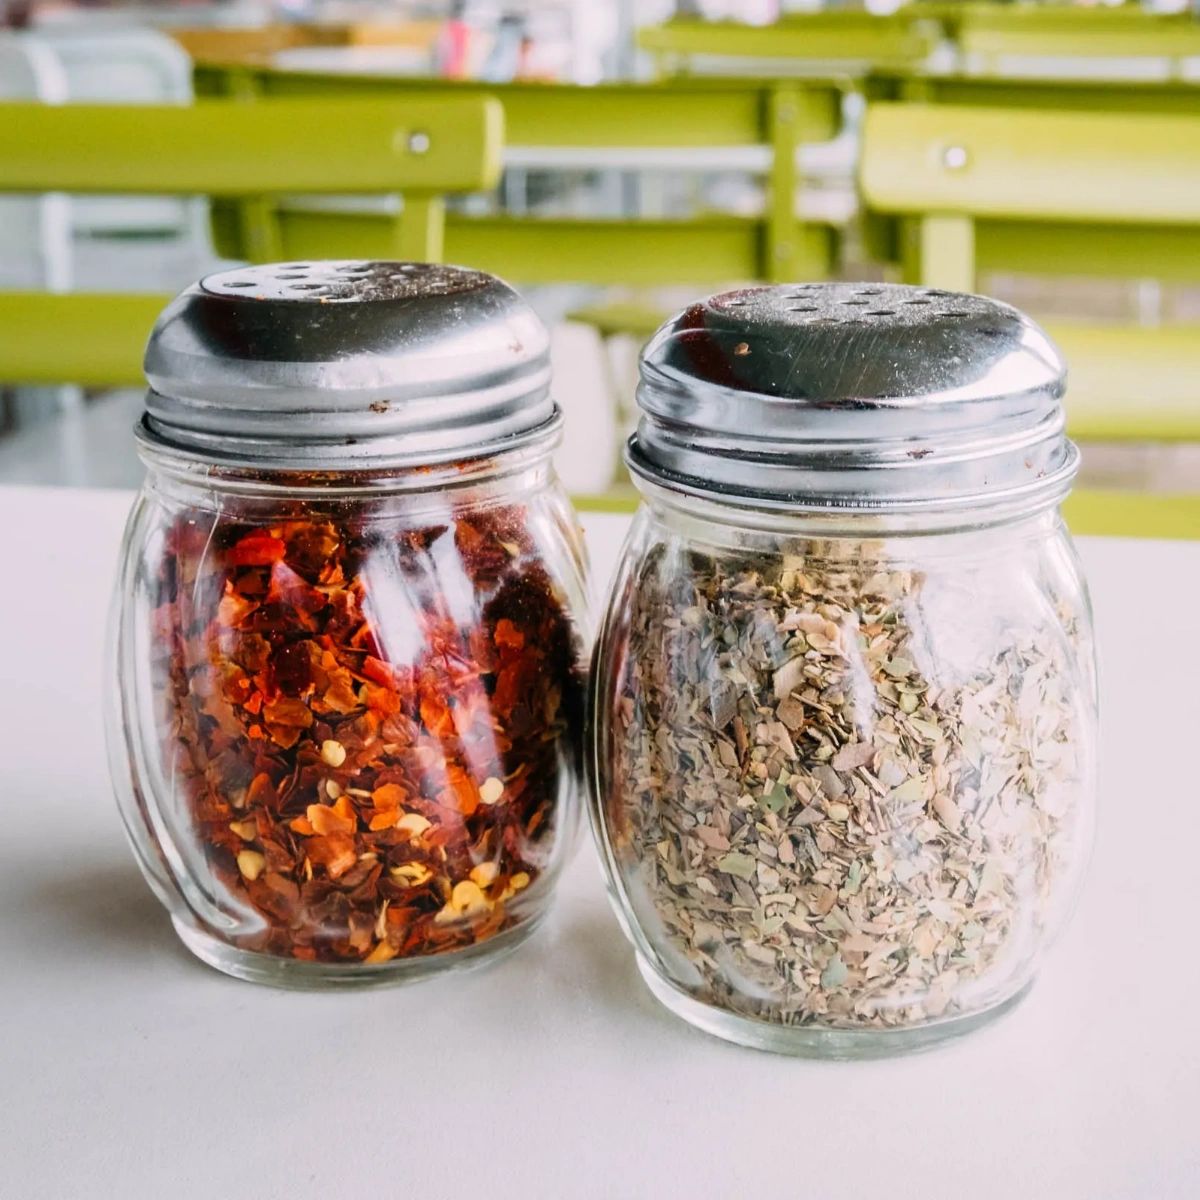 Tip: Add a sprinkle of oregano and red pepper flakes to your pizza for an extra kick of flavor!

#RidgefieldCT #CTBites #HelloRidgefield #CTEats #RidgefieldCTMoms #Redding #ReddingCTMoms #RidgefieldEats #InRidgefield #WiltonCT #DanburyCT